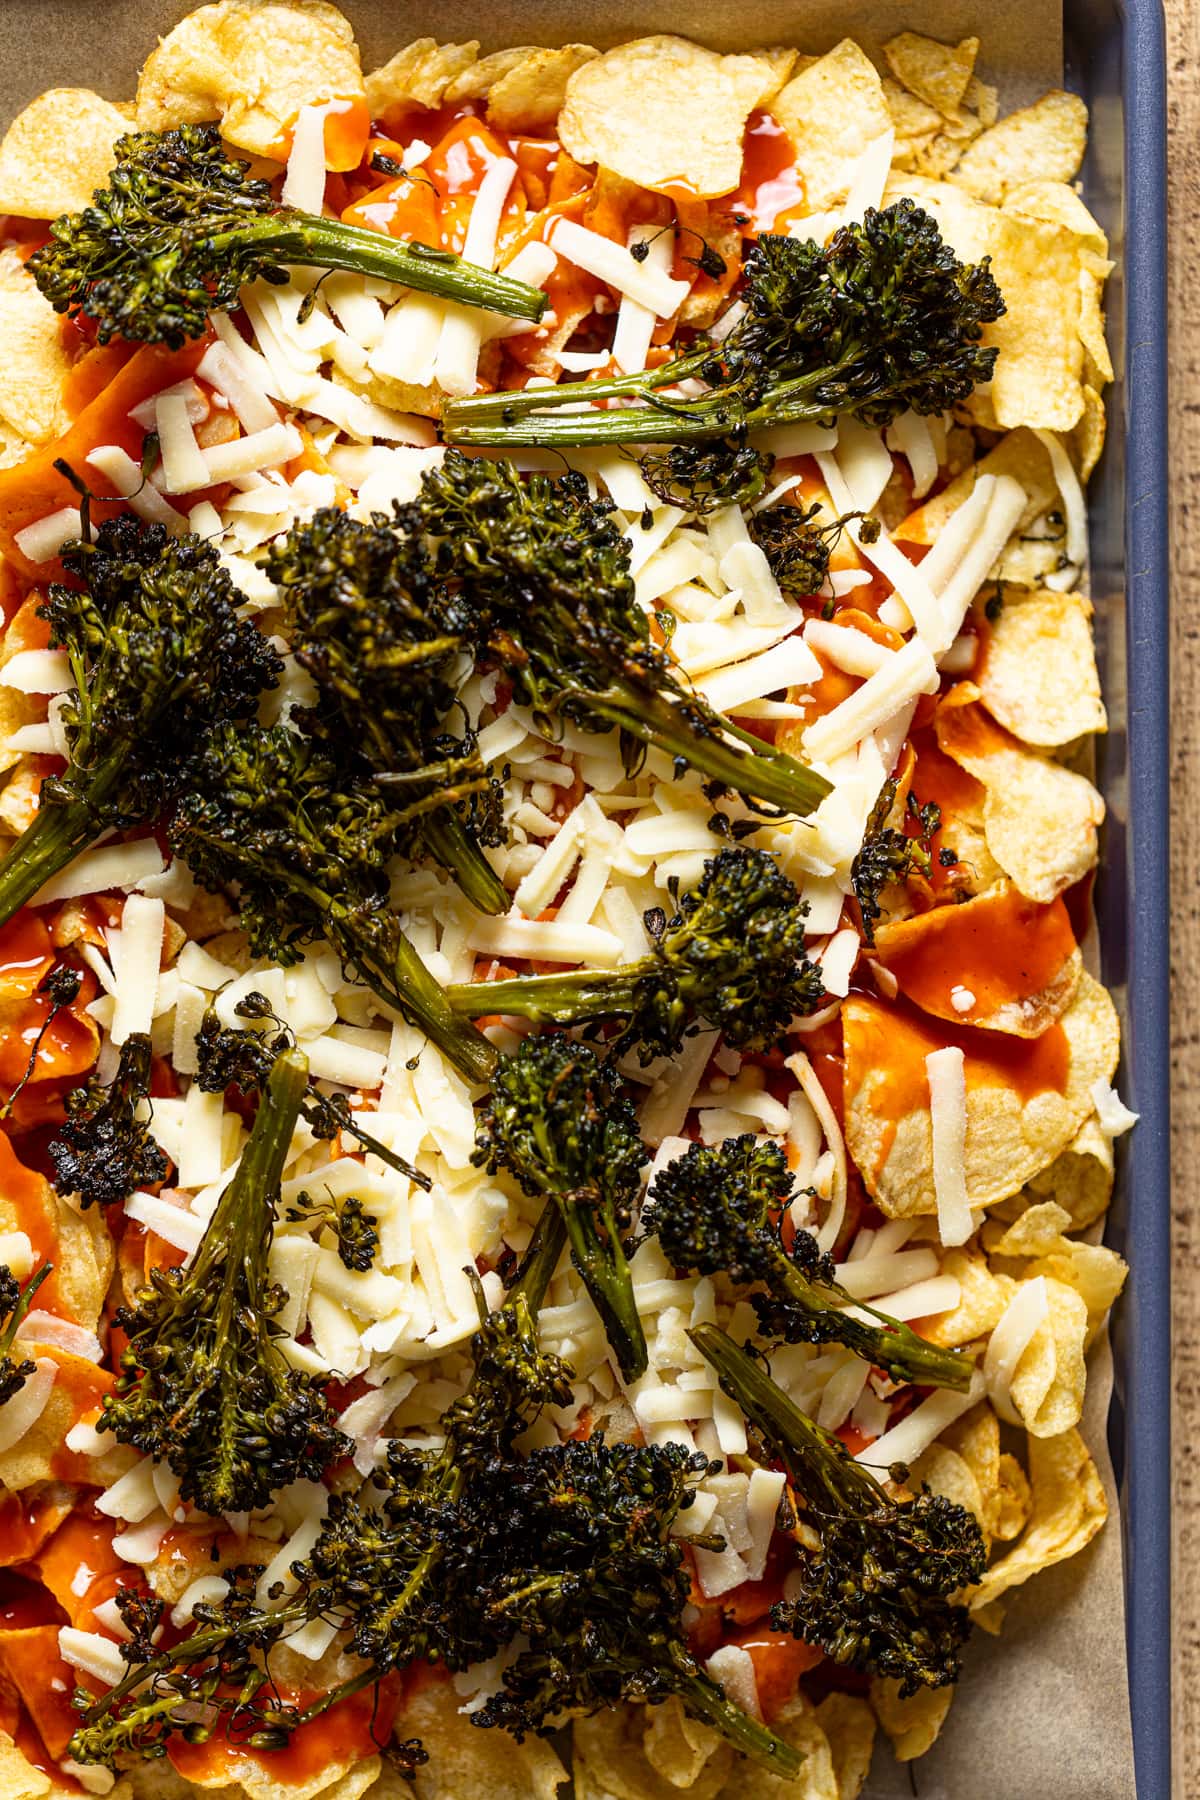 Kettle chips topped with red sauce, shredded cheese, and roasted broccolini